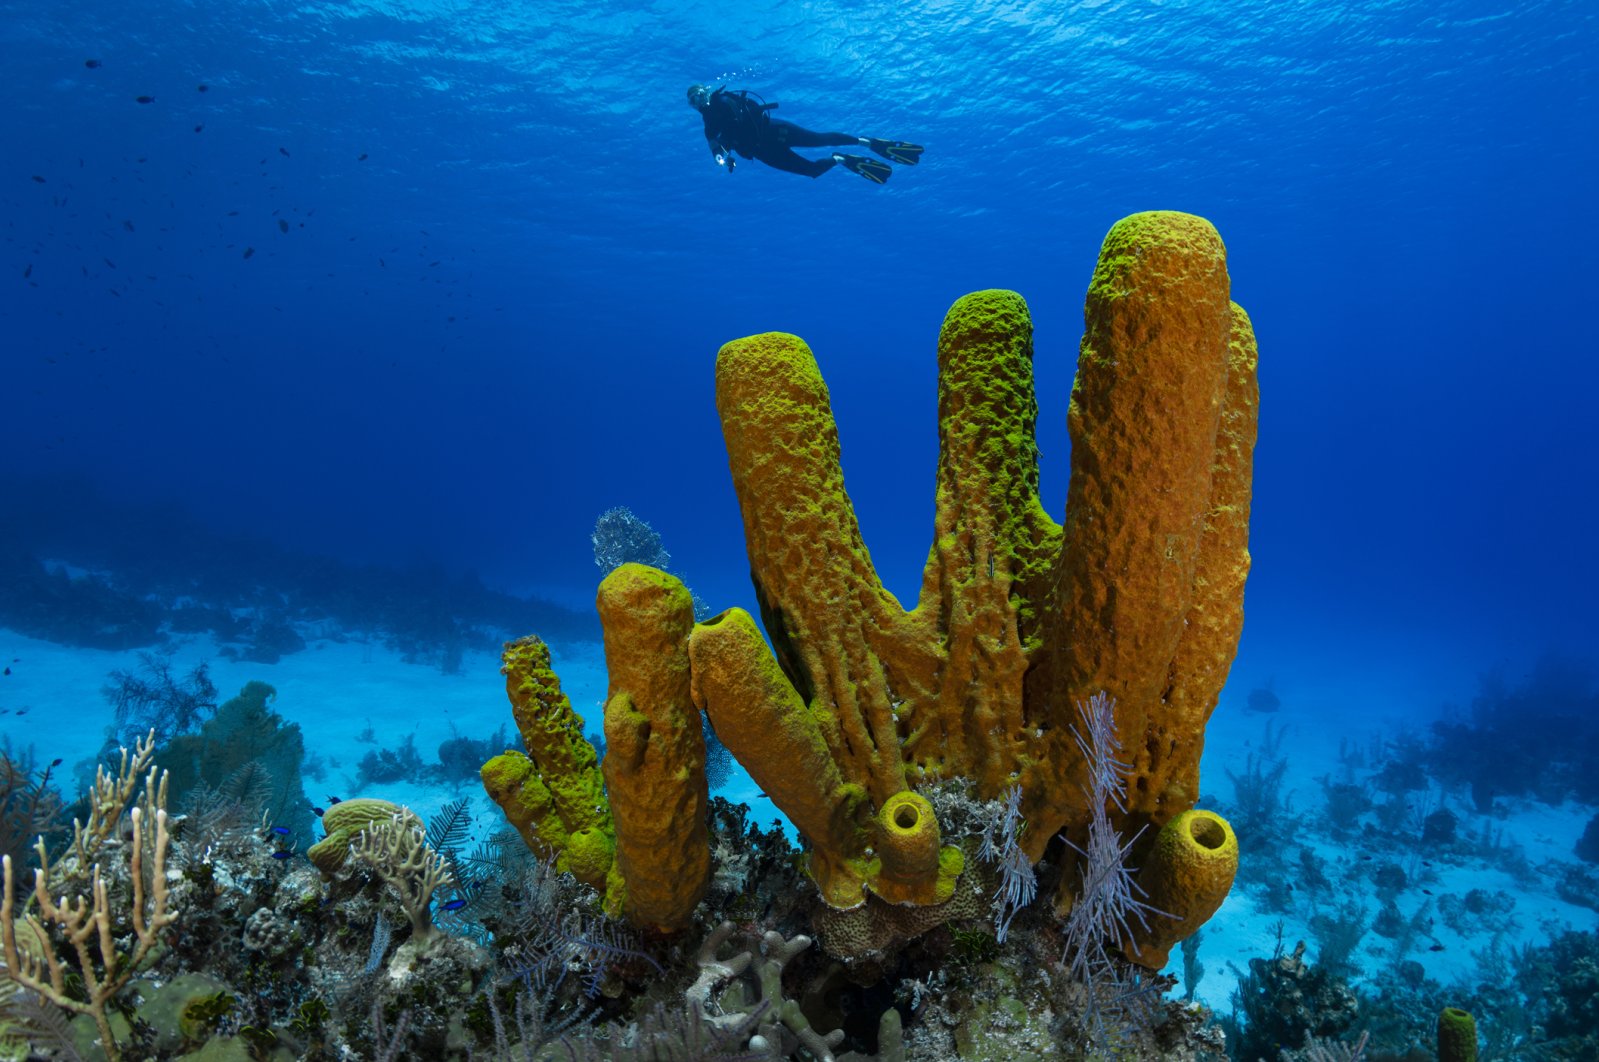 Yellow tube sponges (pictured) are filter feeders, which means that they eat plankton and bacteria and are not carnivores. (iStock Photo)